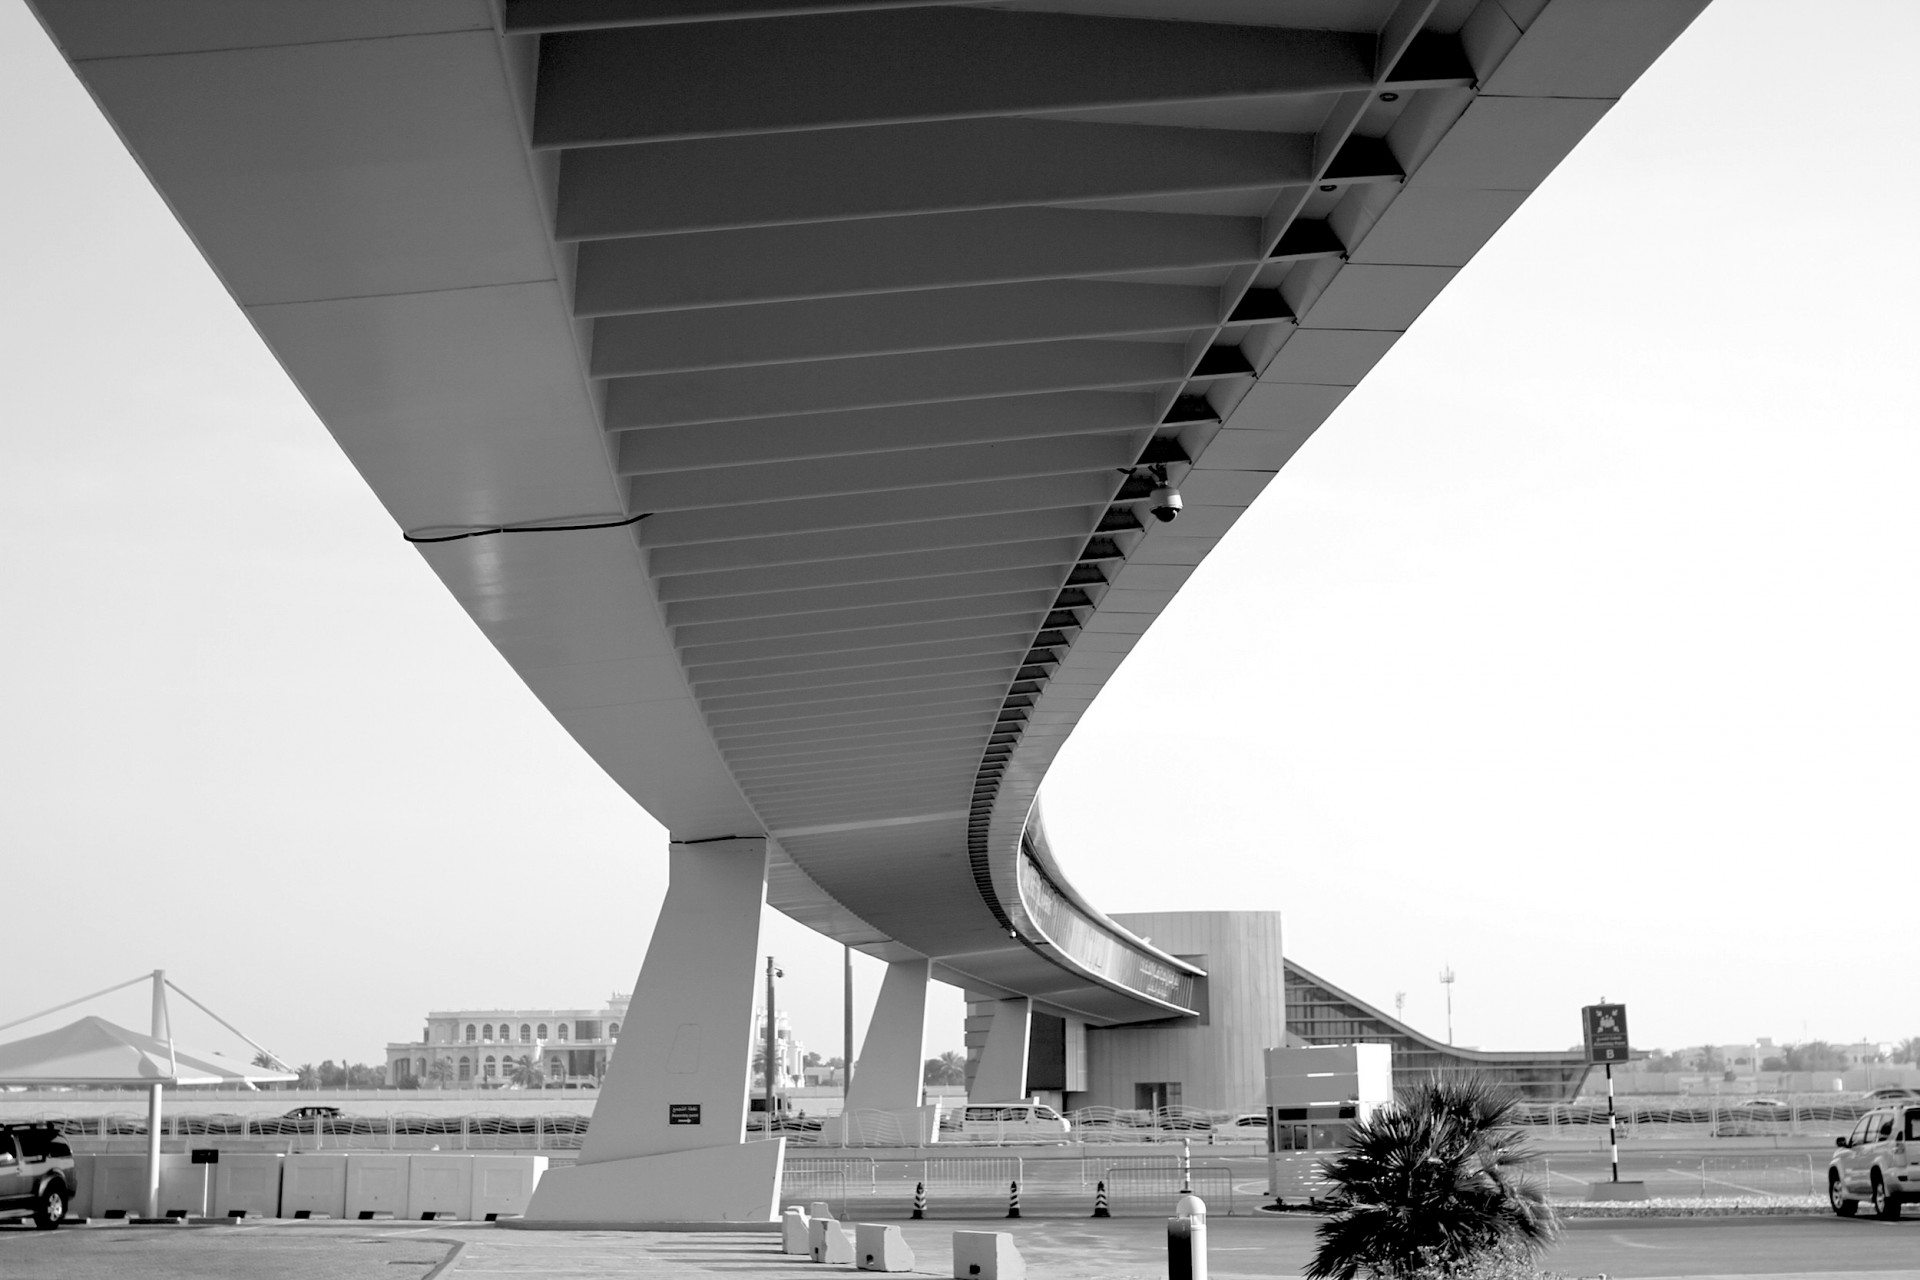 Curved and clear. The Pedestrian Bridge by Dissing + Weitling at the ADNEC site.